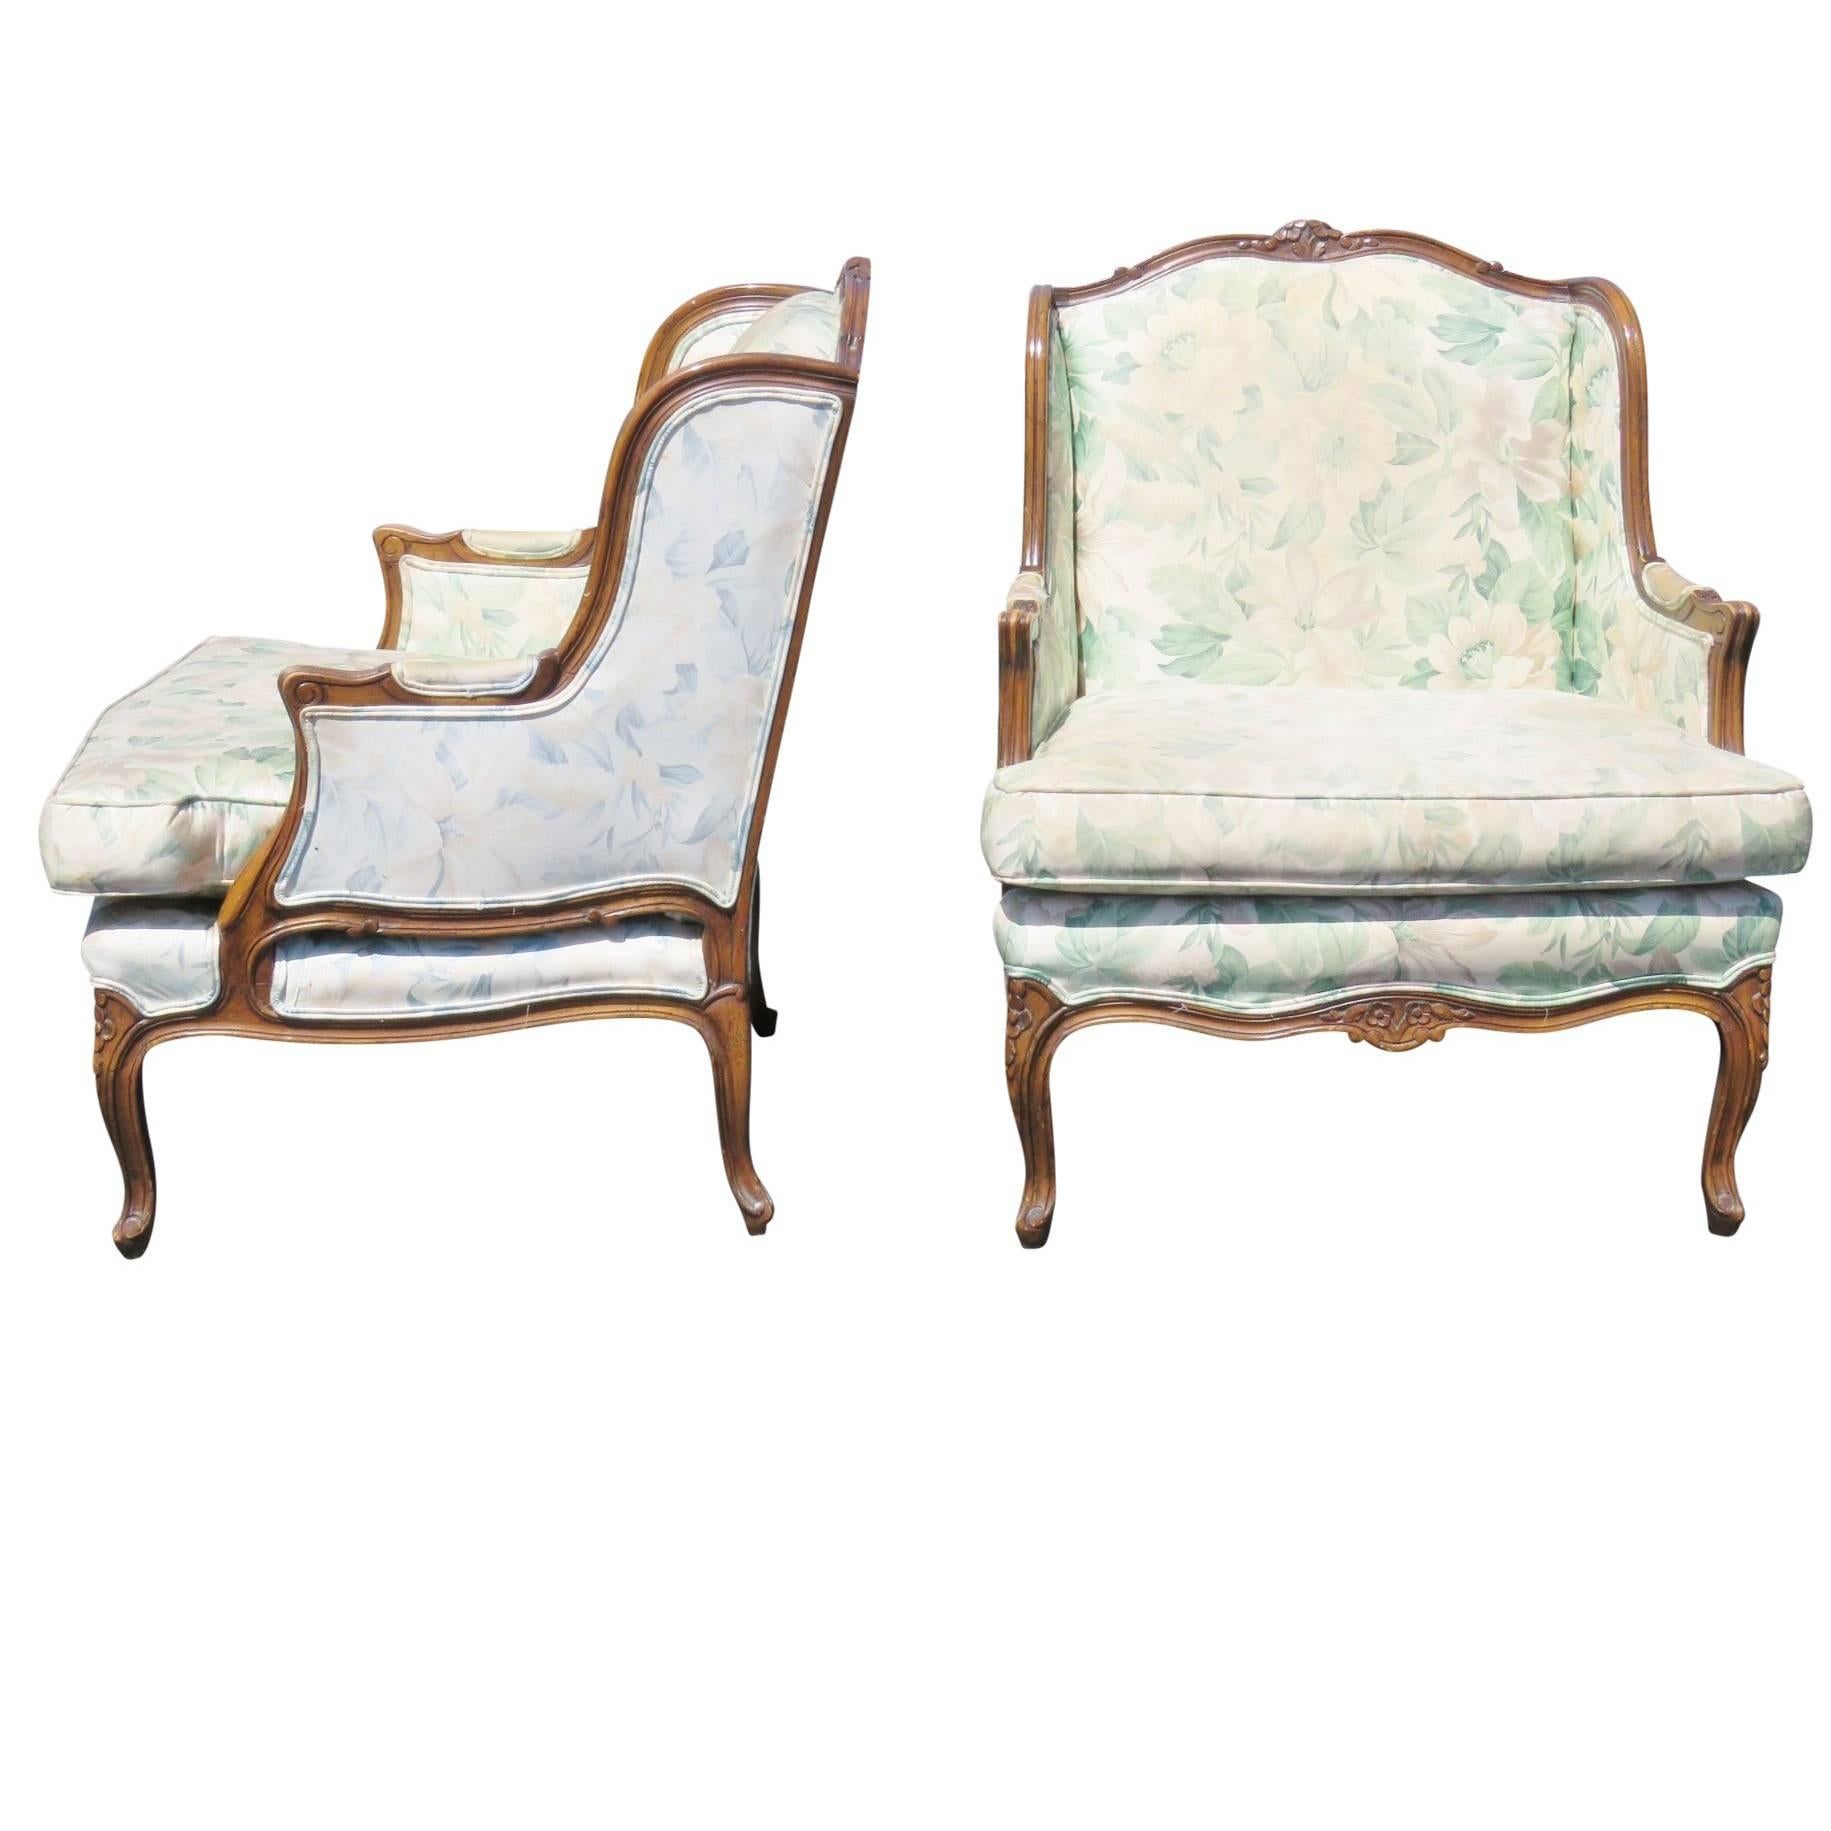 Pair of French Louis XVI Style Carved Walnut Bergere Marquis Chairs 